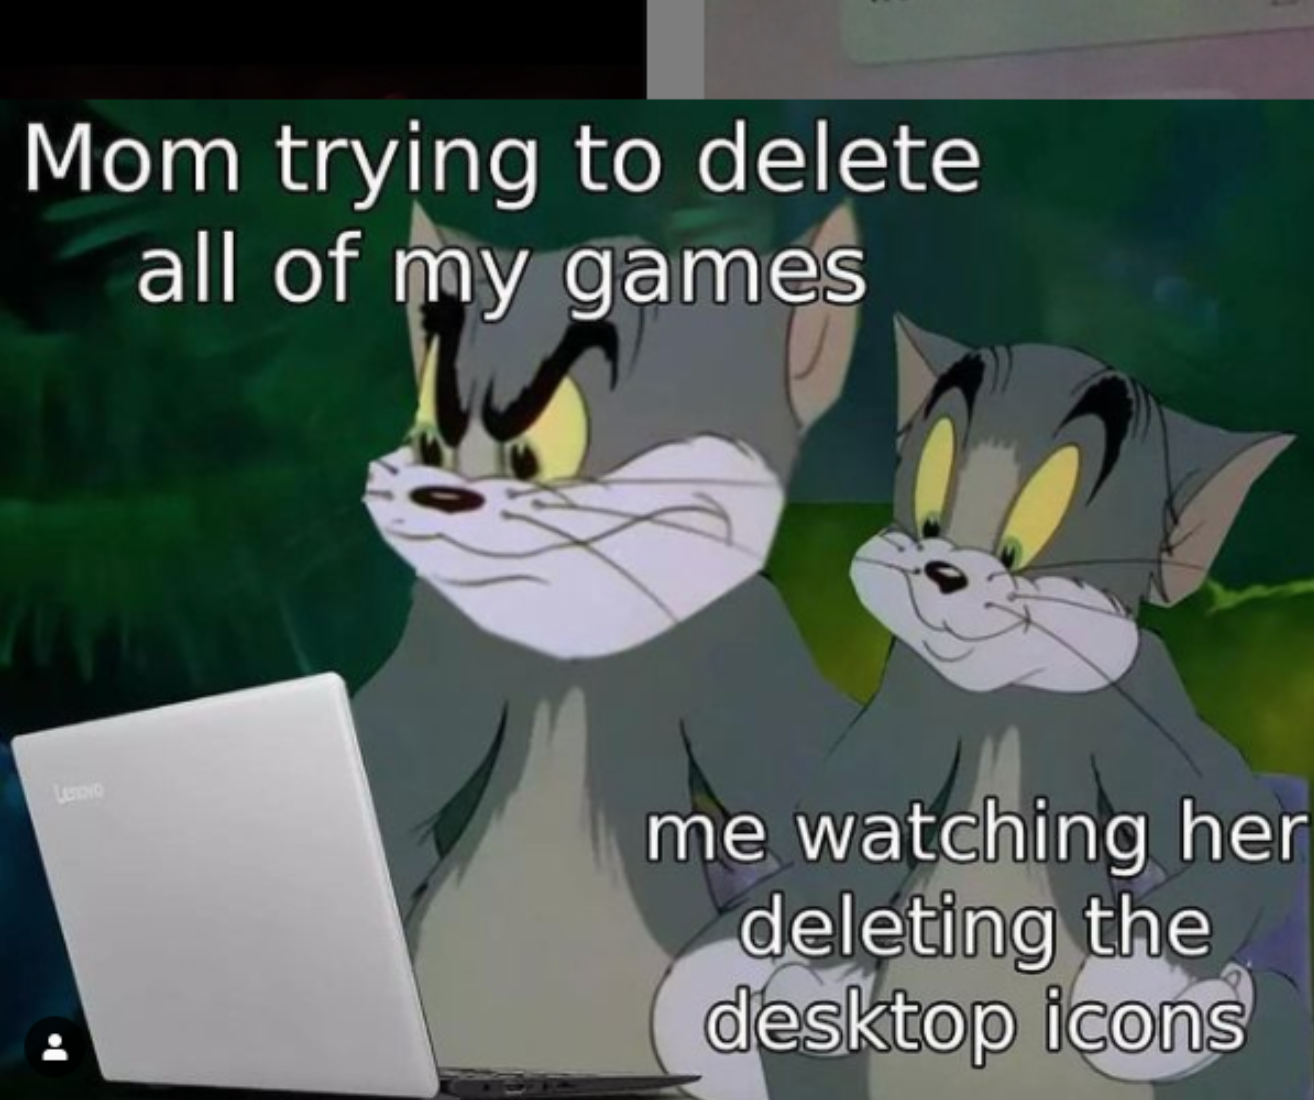 funny gaming memes - my mom trying to delete my games - Mom trying to delete all of my games me watching her deleting the desktop icons